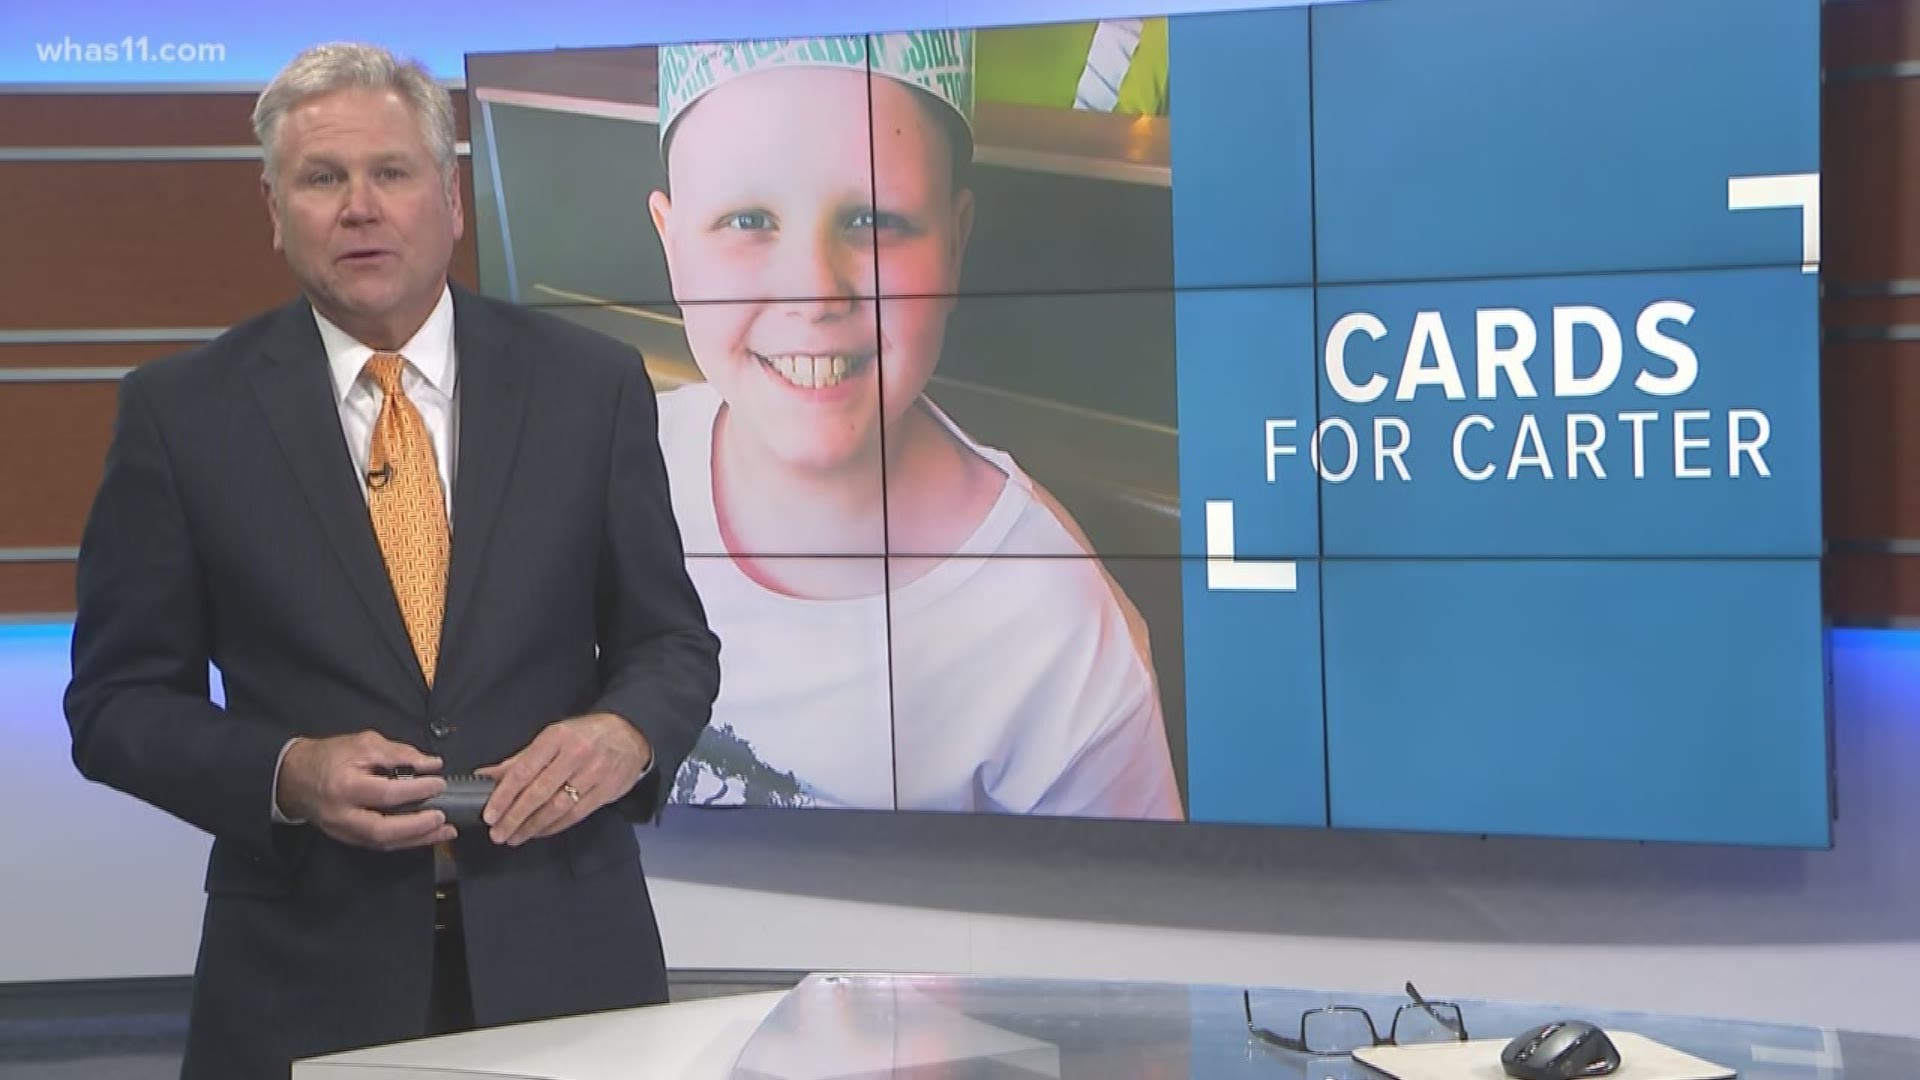 Courageous Carte, who is fighting cancer, wants birthday cards for his 10th birthday